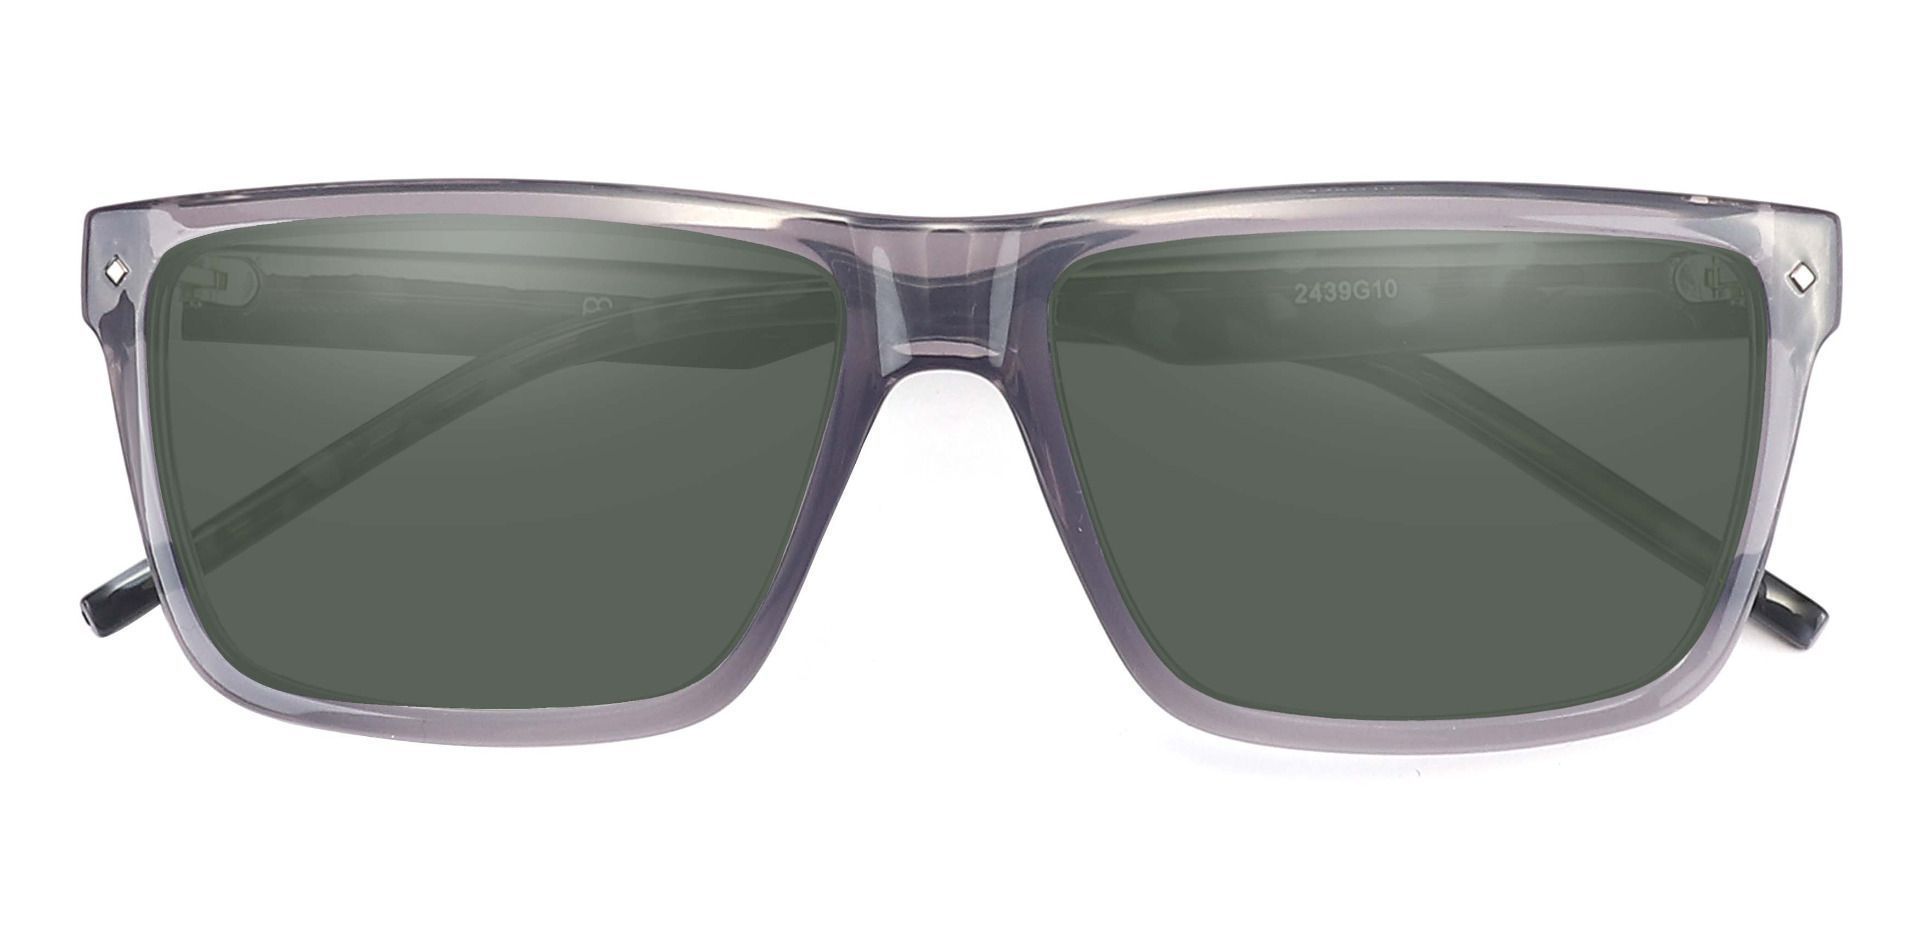 Marietta Rectangle Lined Bifocal Sunglasses - Gray Frame With Green Lenses